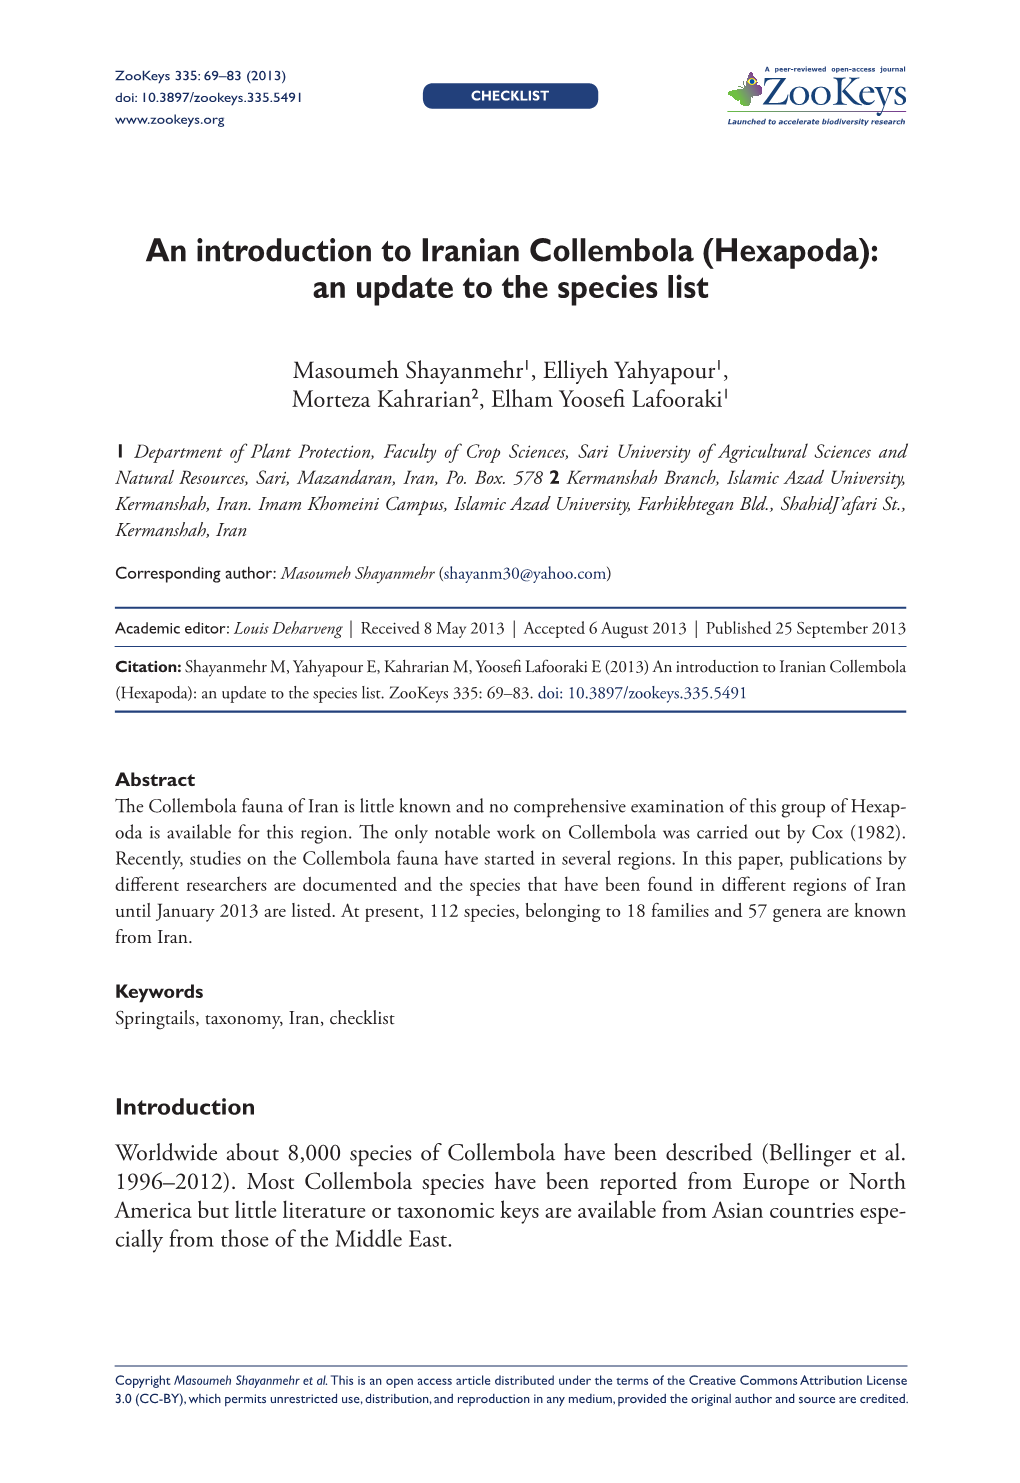 An Introduction to Iranian Collembola (Hexapoda): an Update to the Species List